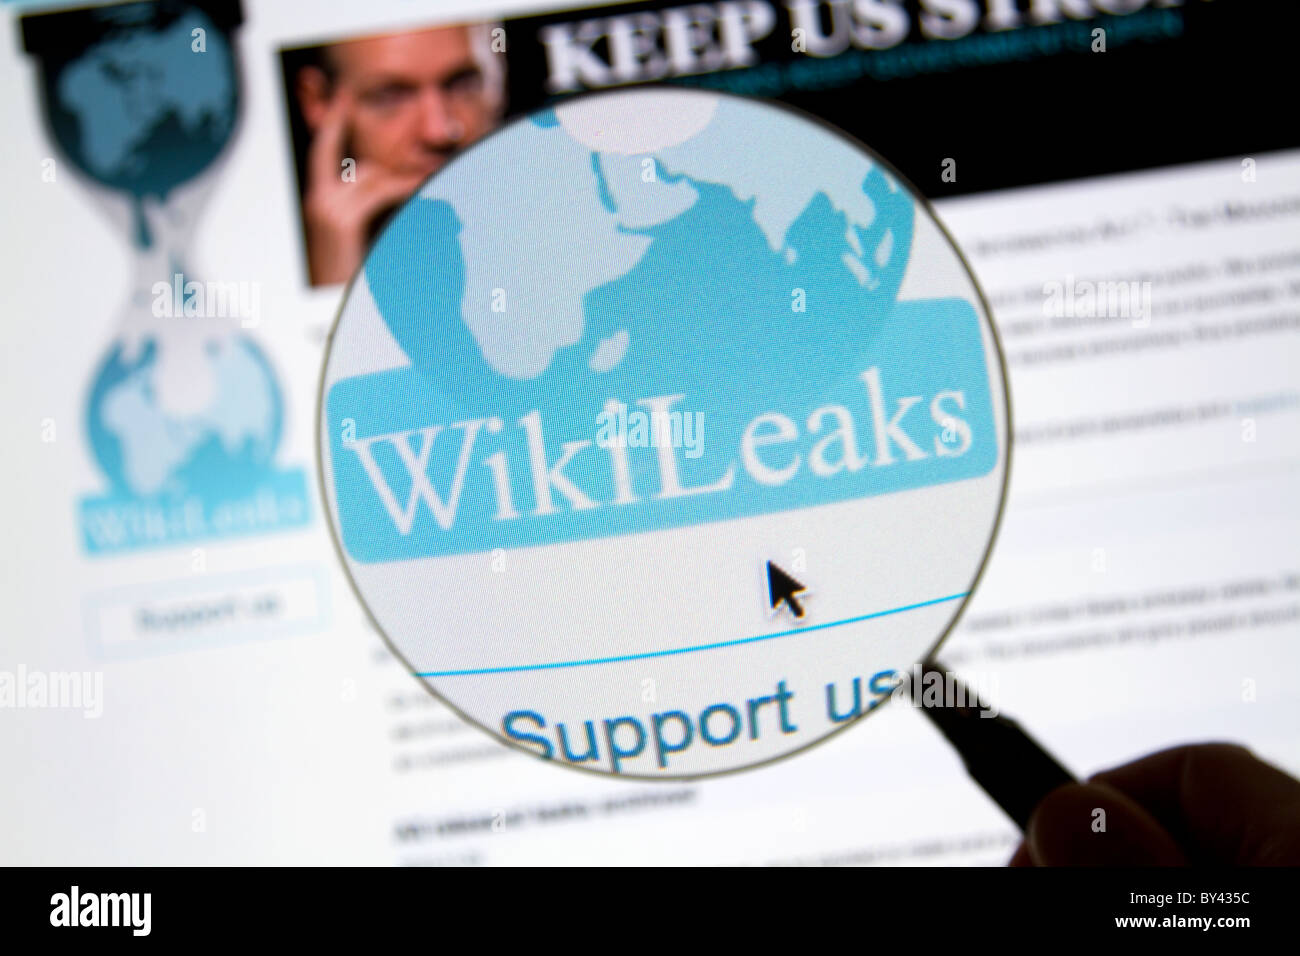 Wikileaks website page with Wikileaks logo, magnifying glass, and Julian Assange. Stock Photo